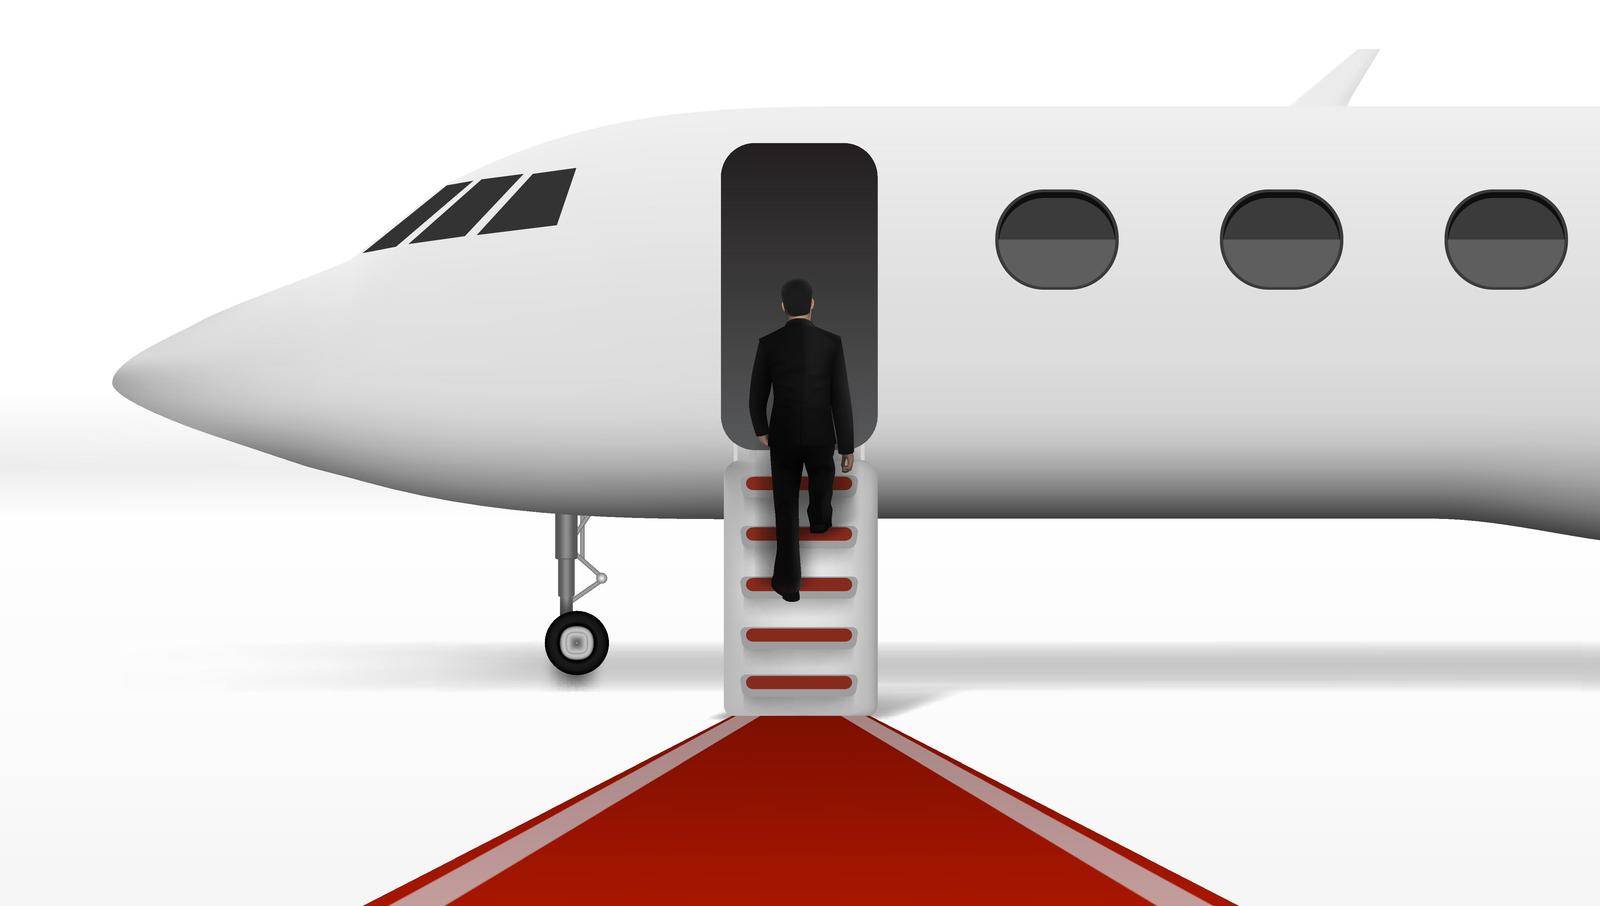 Businessman Boarding In Executive Airliner Corporate Jet by VectorThings